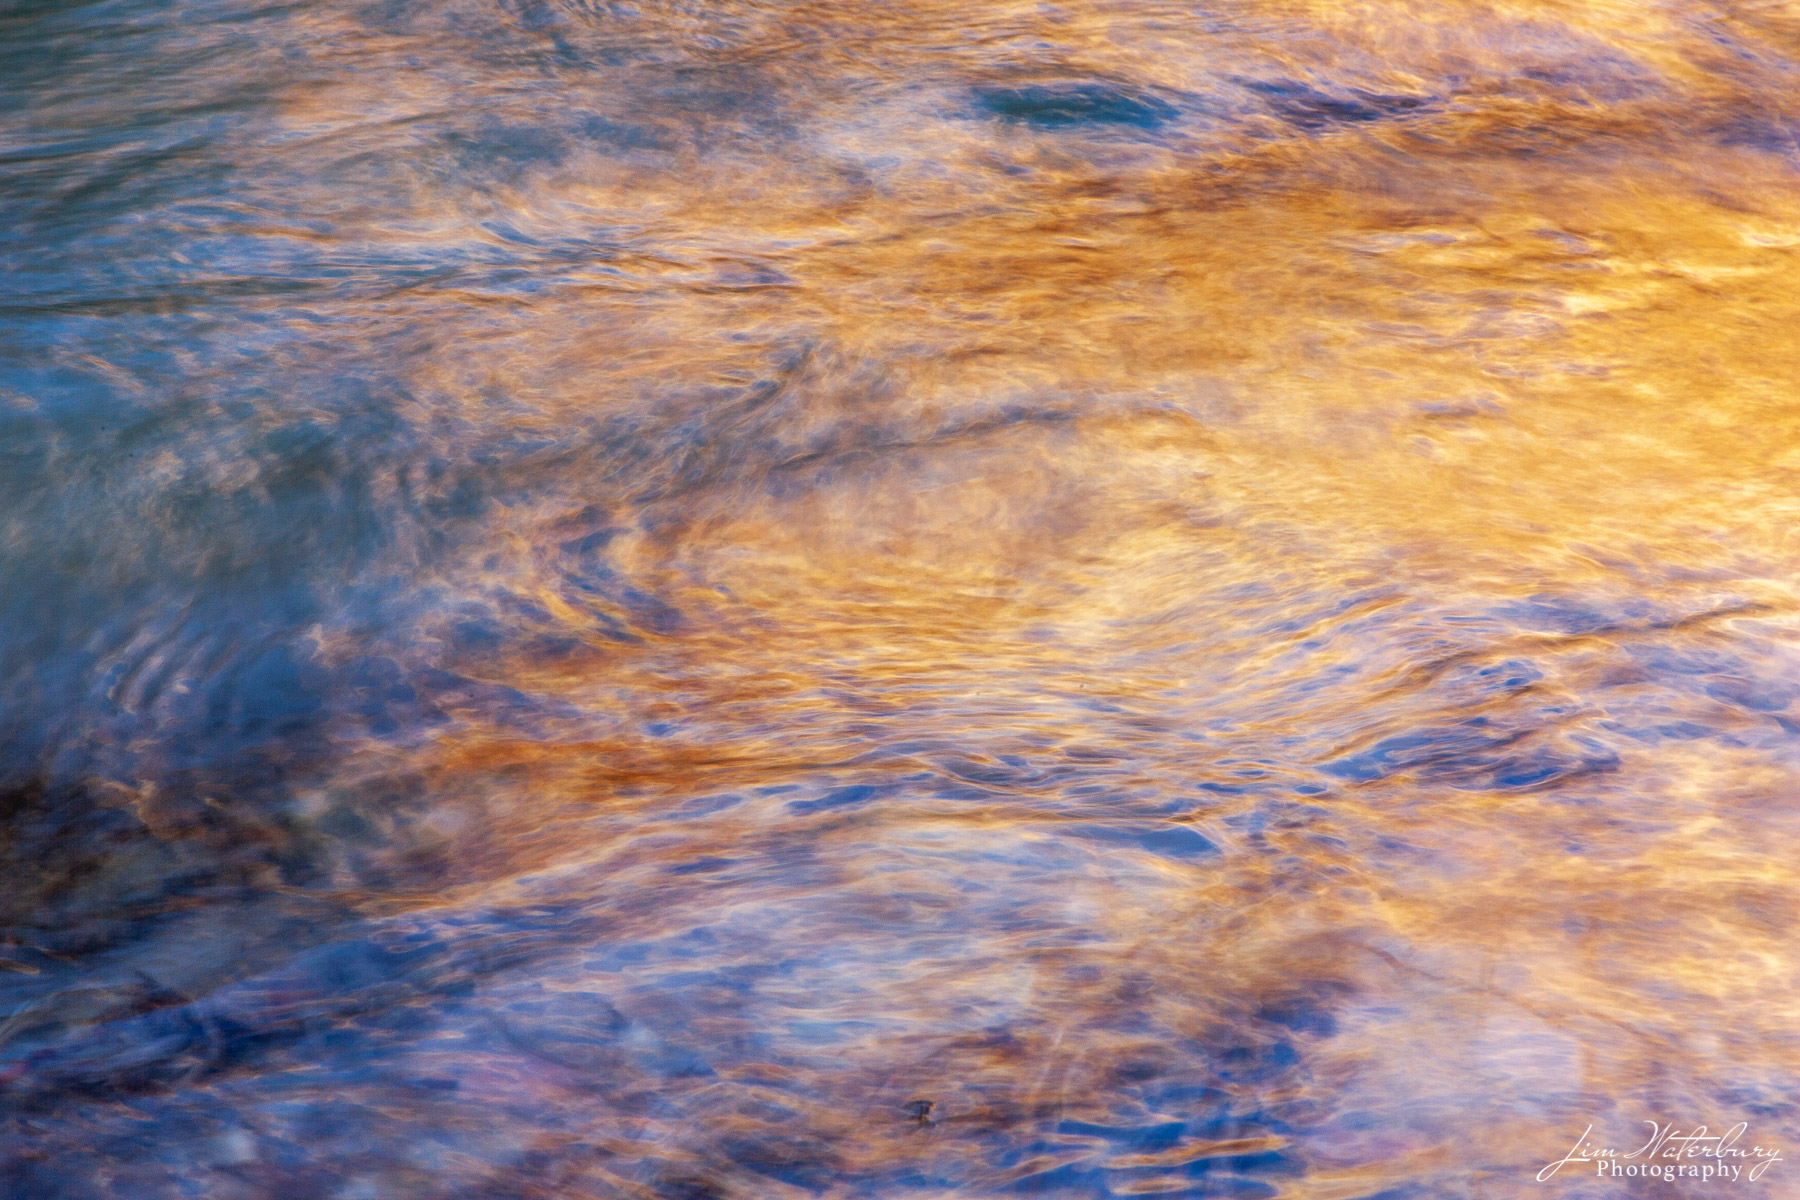 Orange and blue light reflects in a stream in Zion National Park.